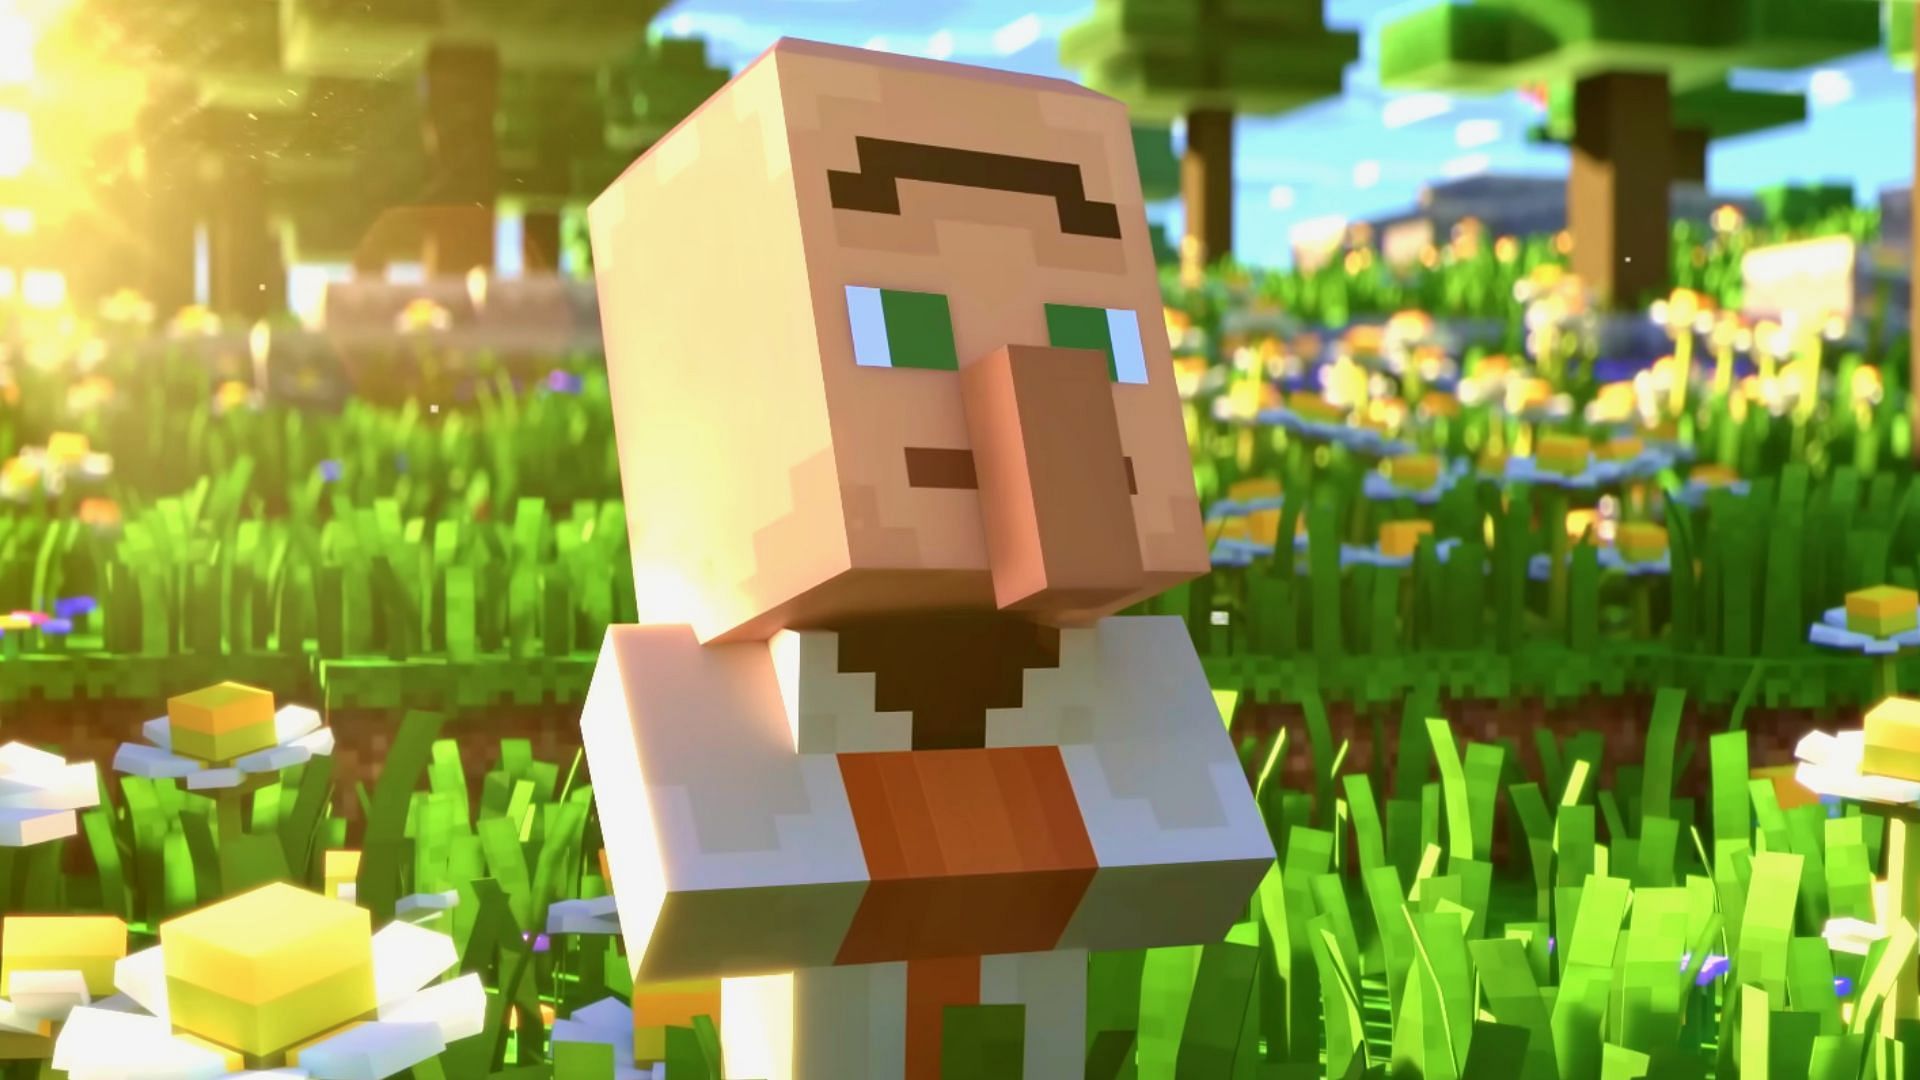 Minecraft Legends release time: When does it come out?